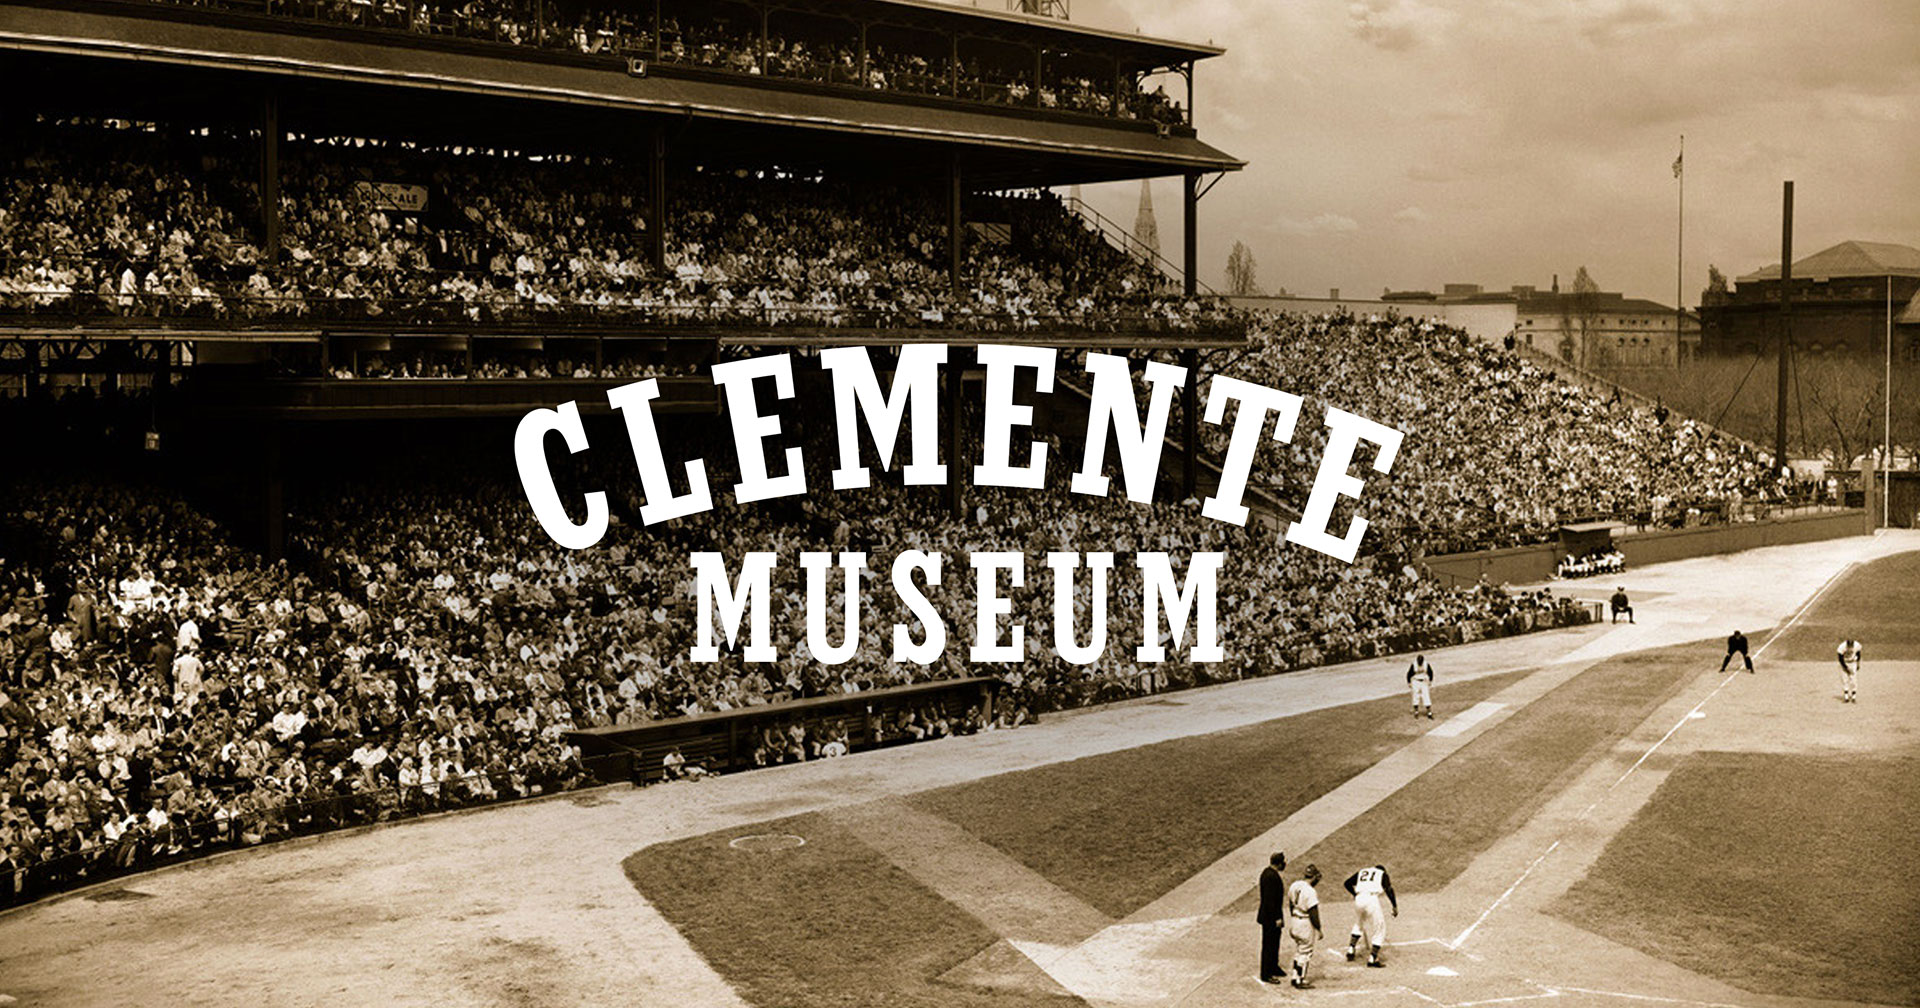 Freshly Scanned Friday! Roberto - The Clemente Museum